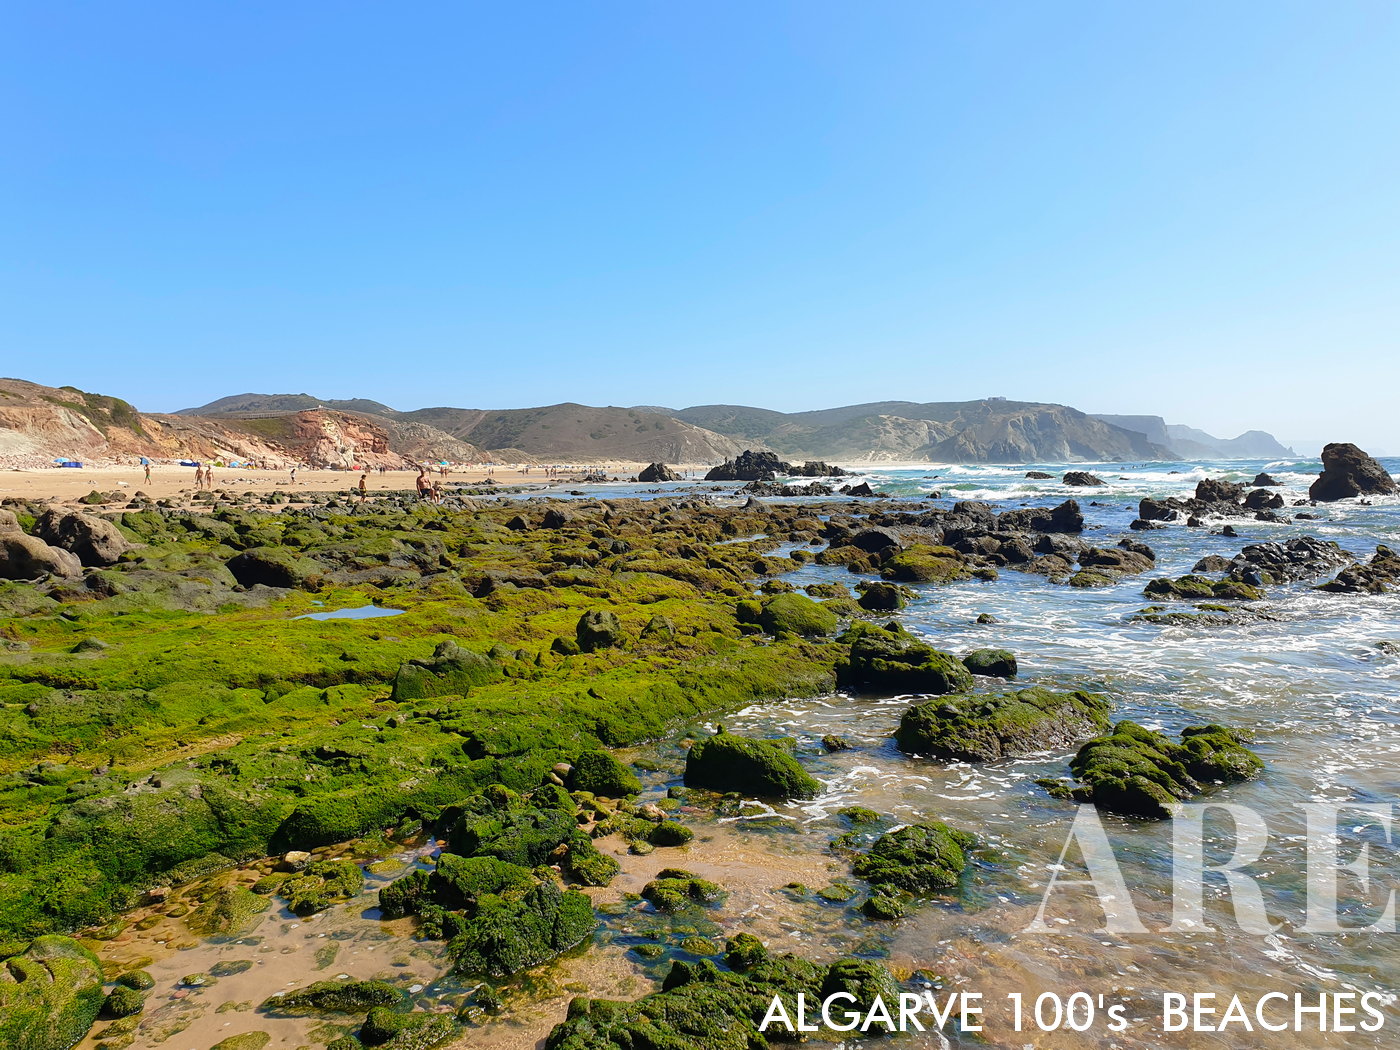 From the northern side of Amado Beach at low tide, the sight of exposed green rocks and small natural pools offers a unique perspective on the ever-changing beauty of this beach.